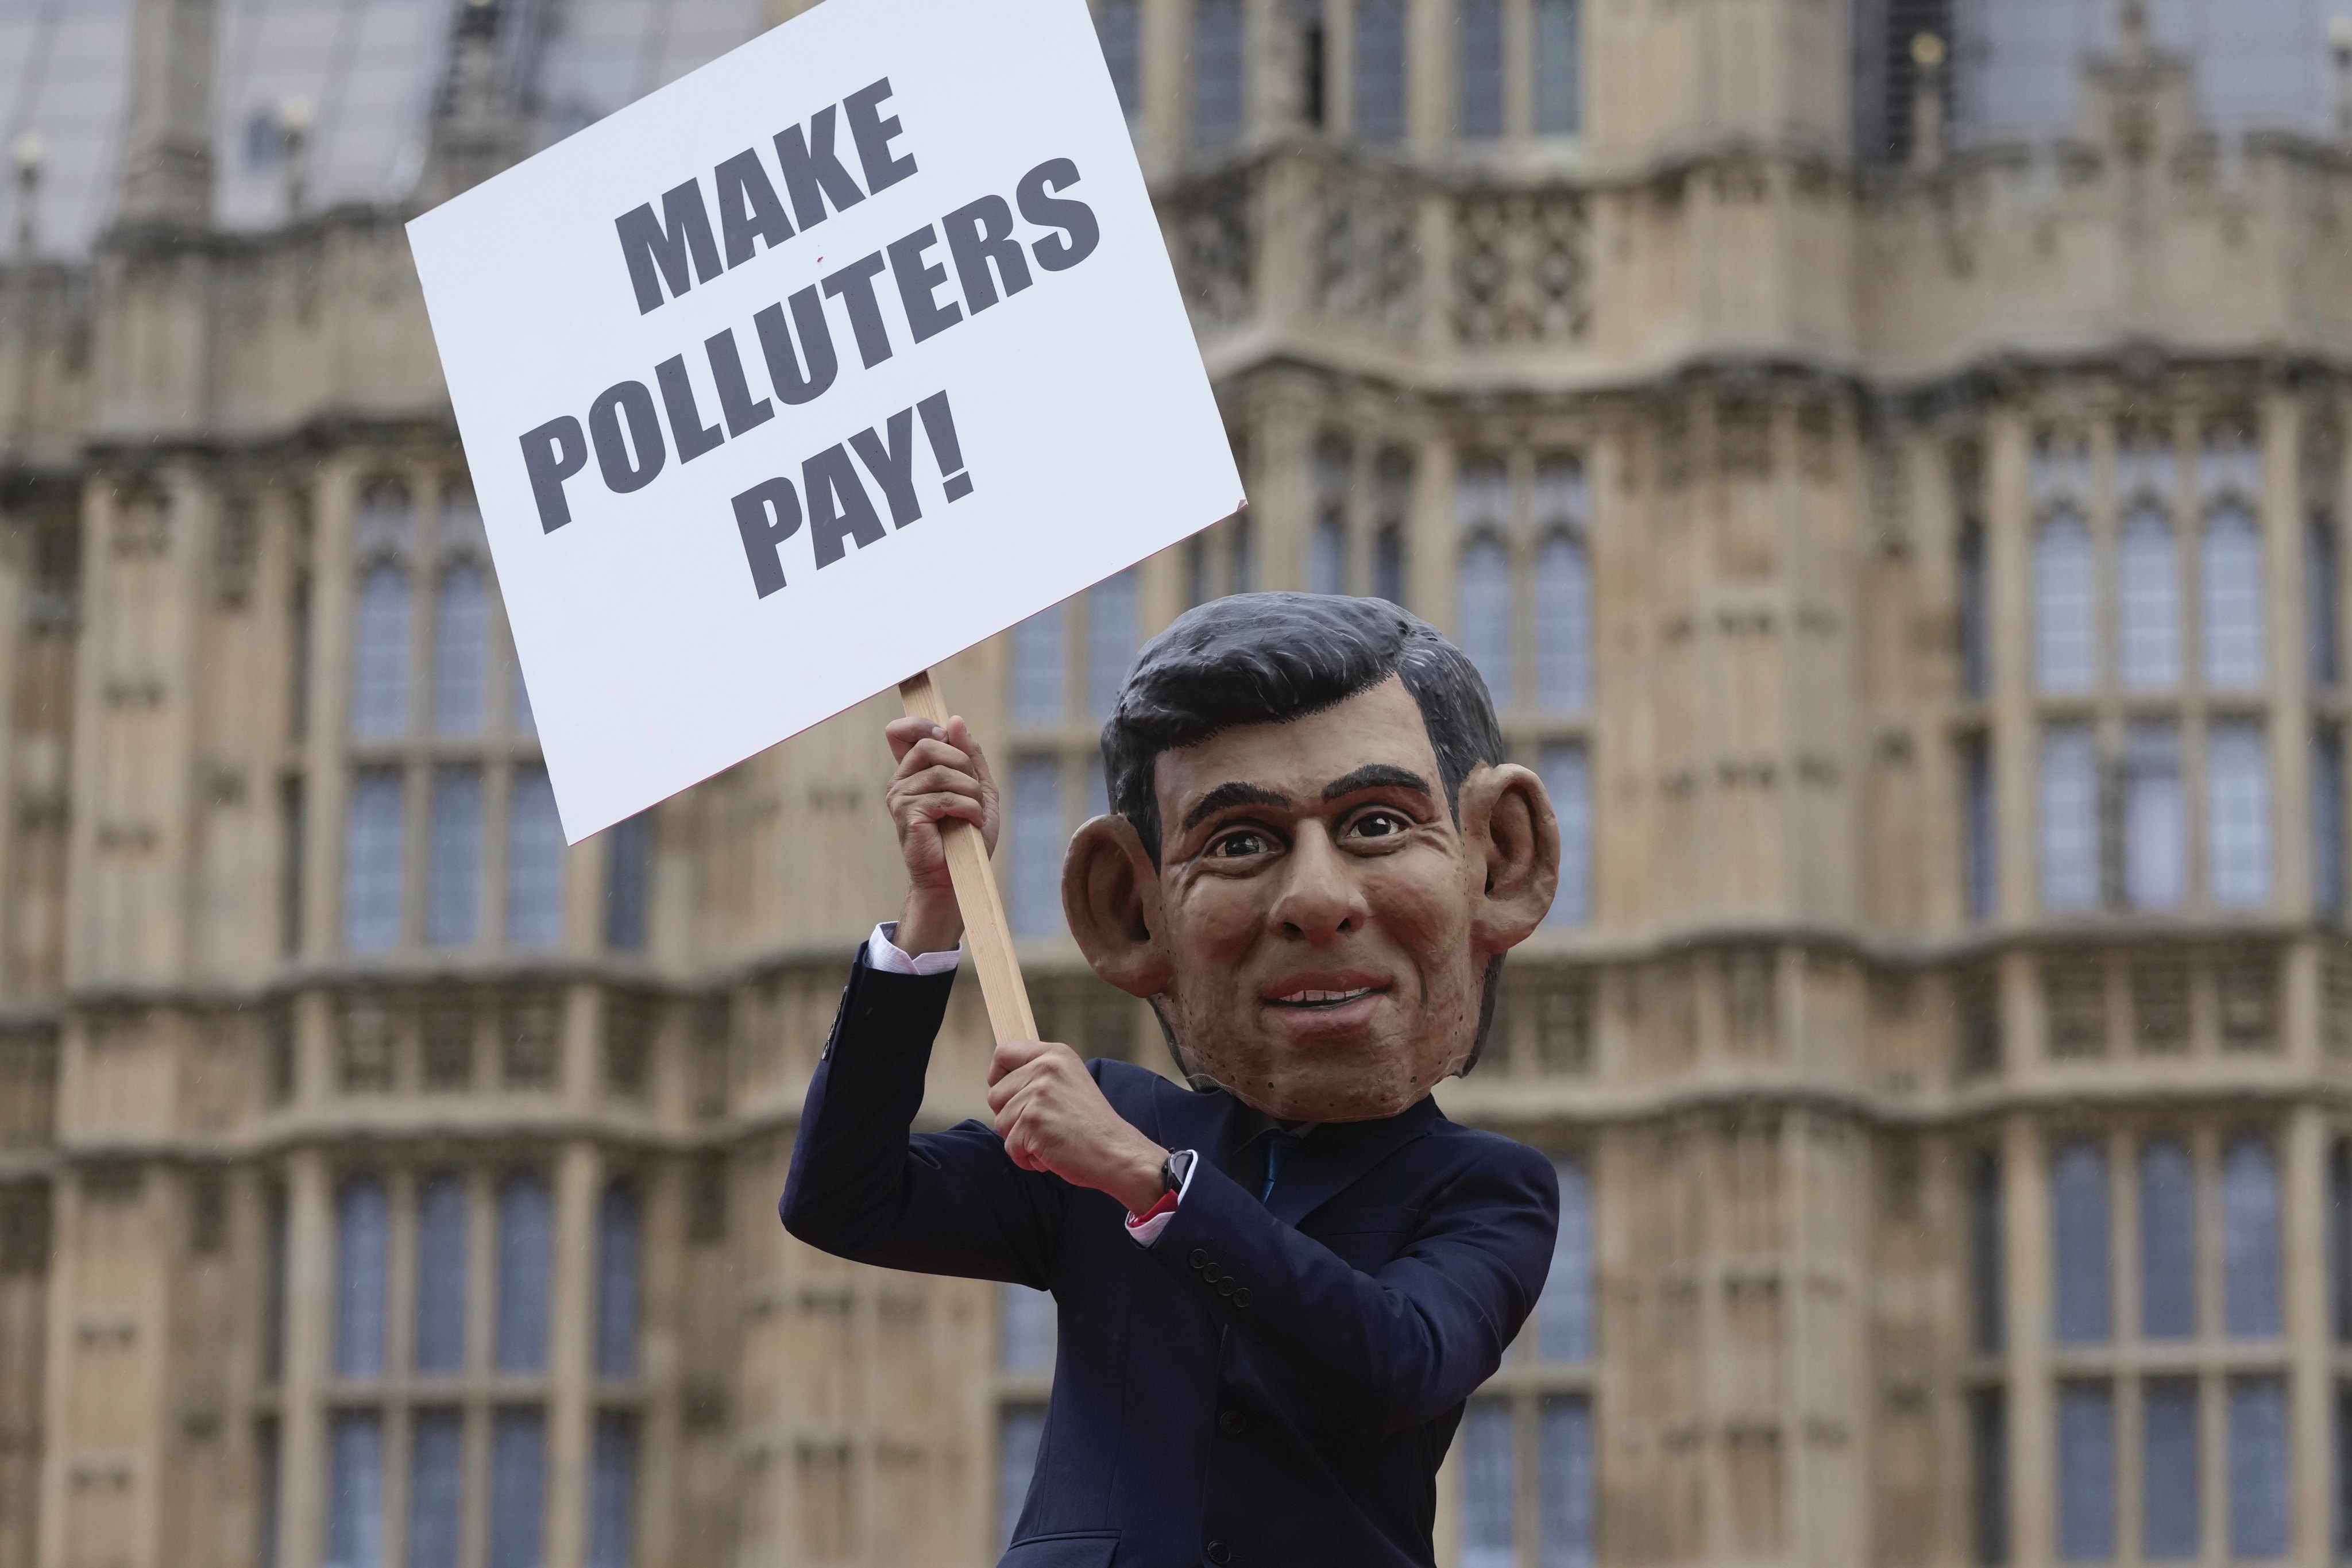 An Oxfam protester in a Rishi Sunak mask outside parliament in London on September 19, on the eve of the UN Climate Ambition Summit, calling for oil and gas giants to pay more tax to raise critical funds to help communities devastated by climate change. Photo: AP